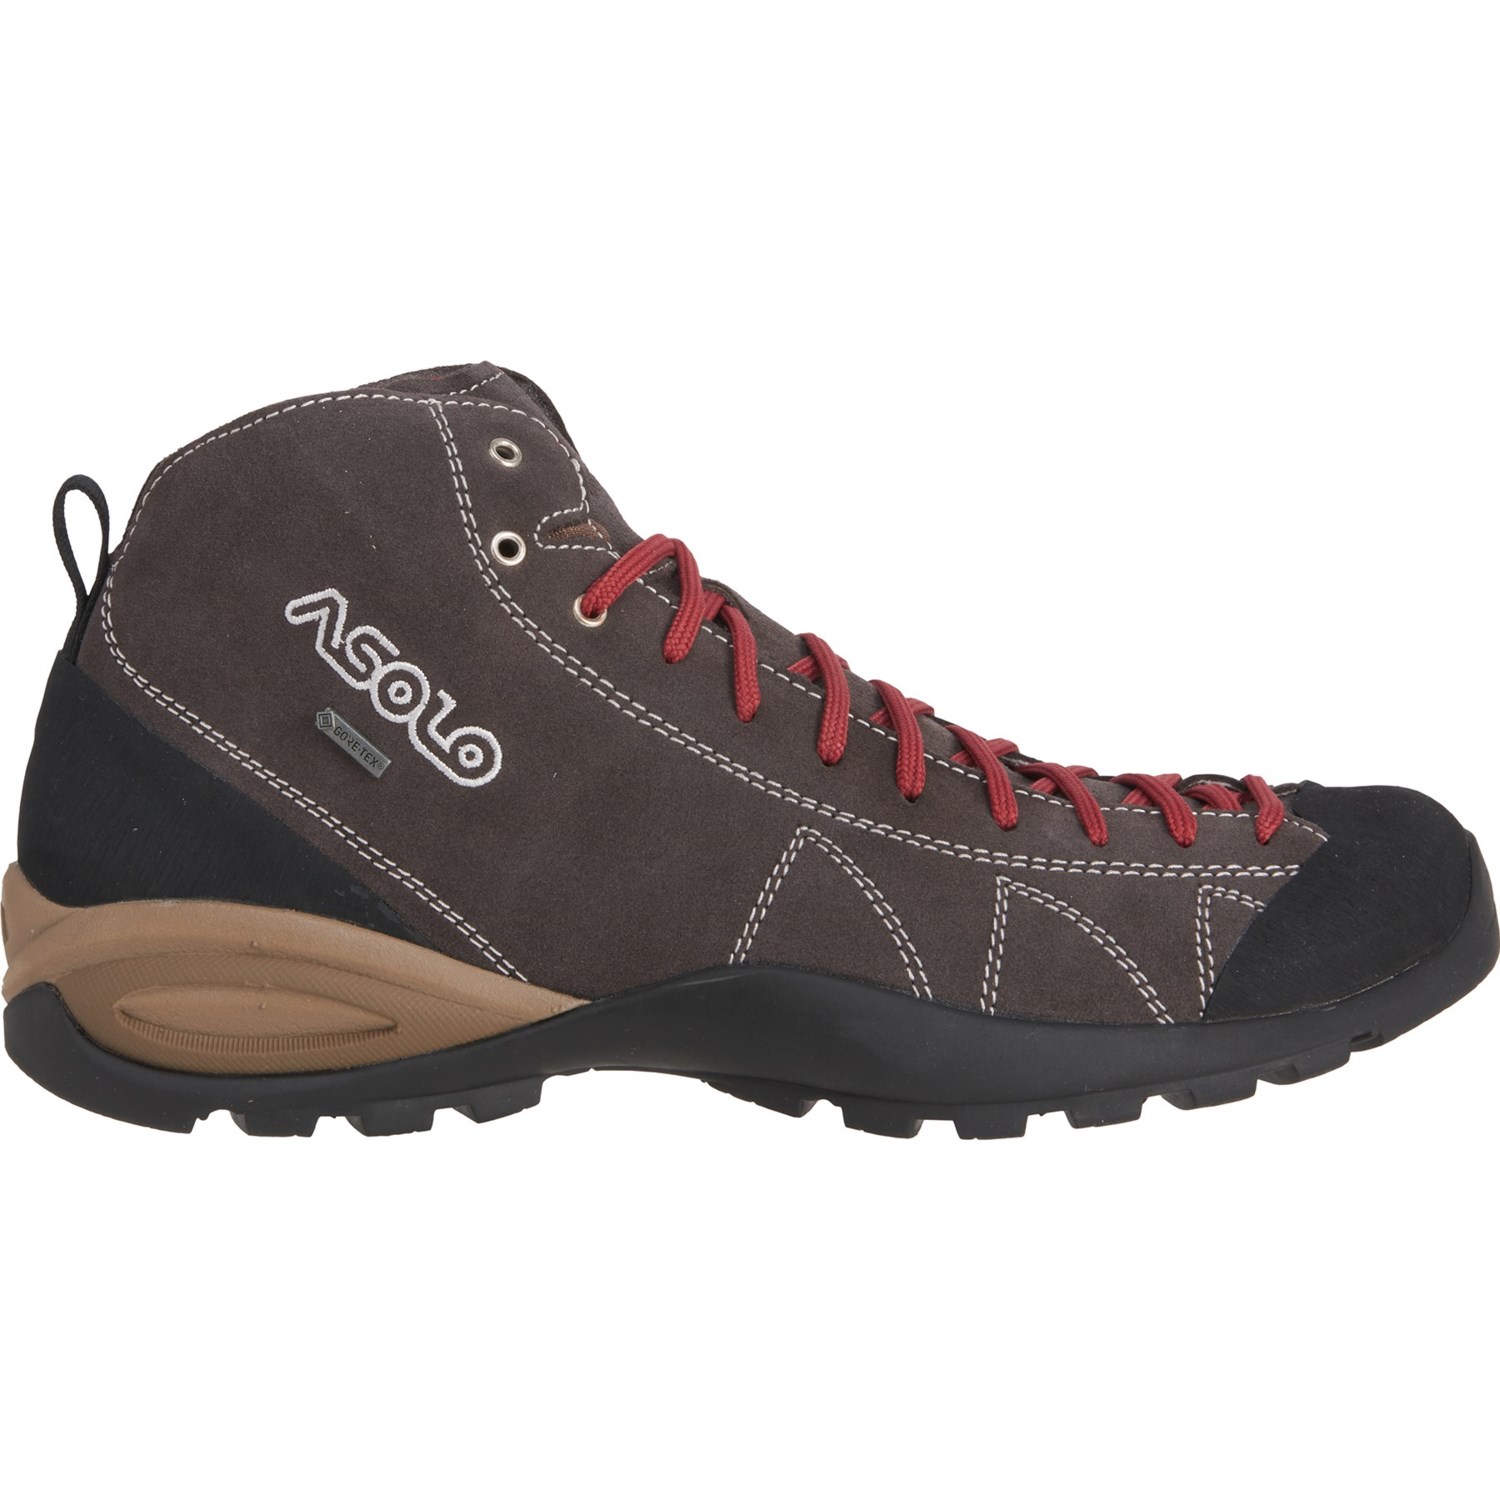 Asolo Cactus Gore-Tex® Suede Hiking Boots - Waterproof 